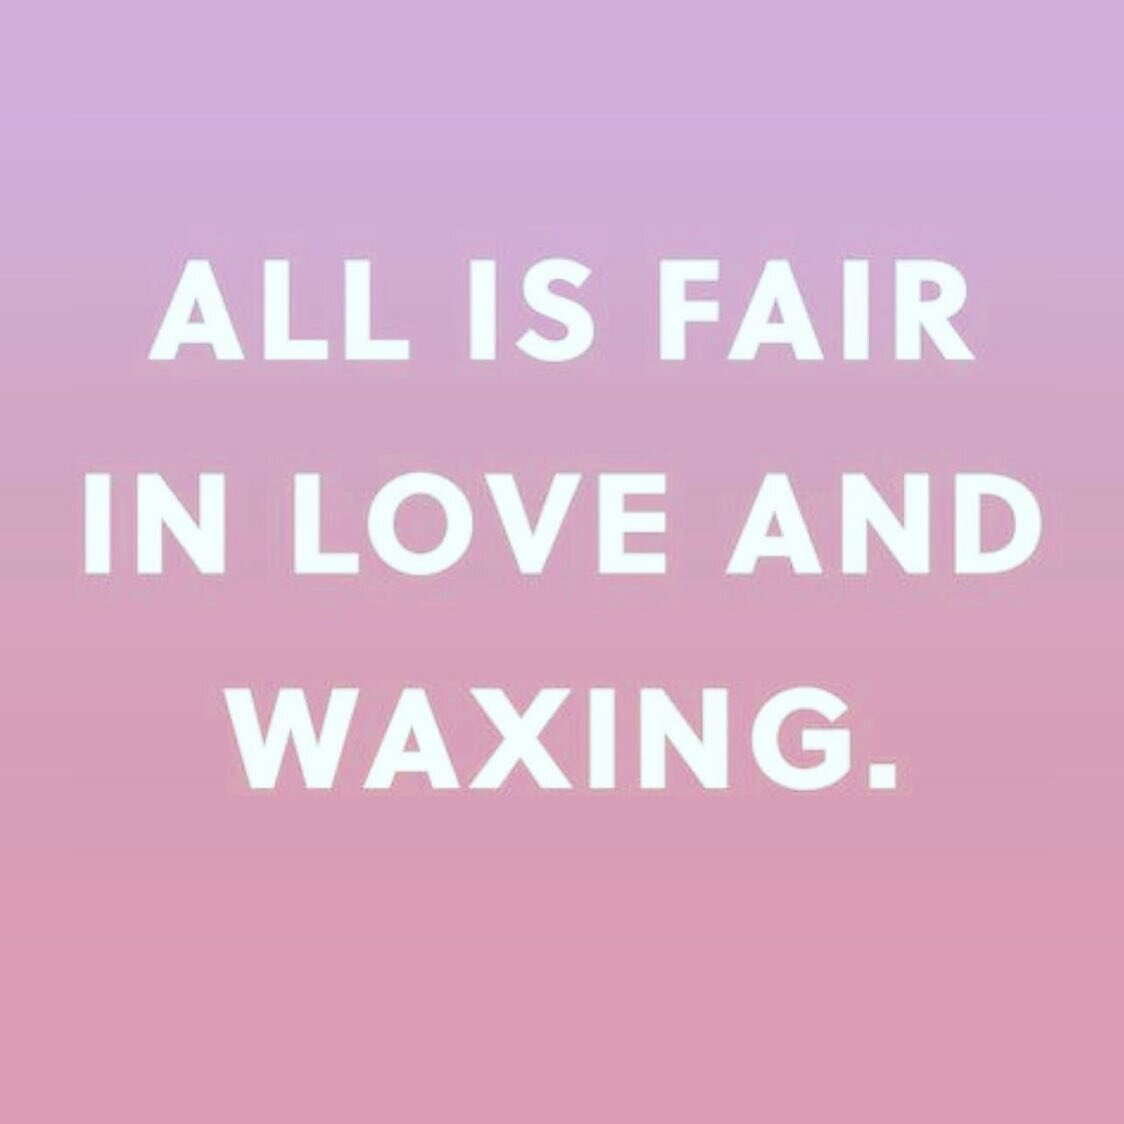 Isn&rsquo;t That The Truth 😂❤️ #fyp #waxing #hairremoval